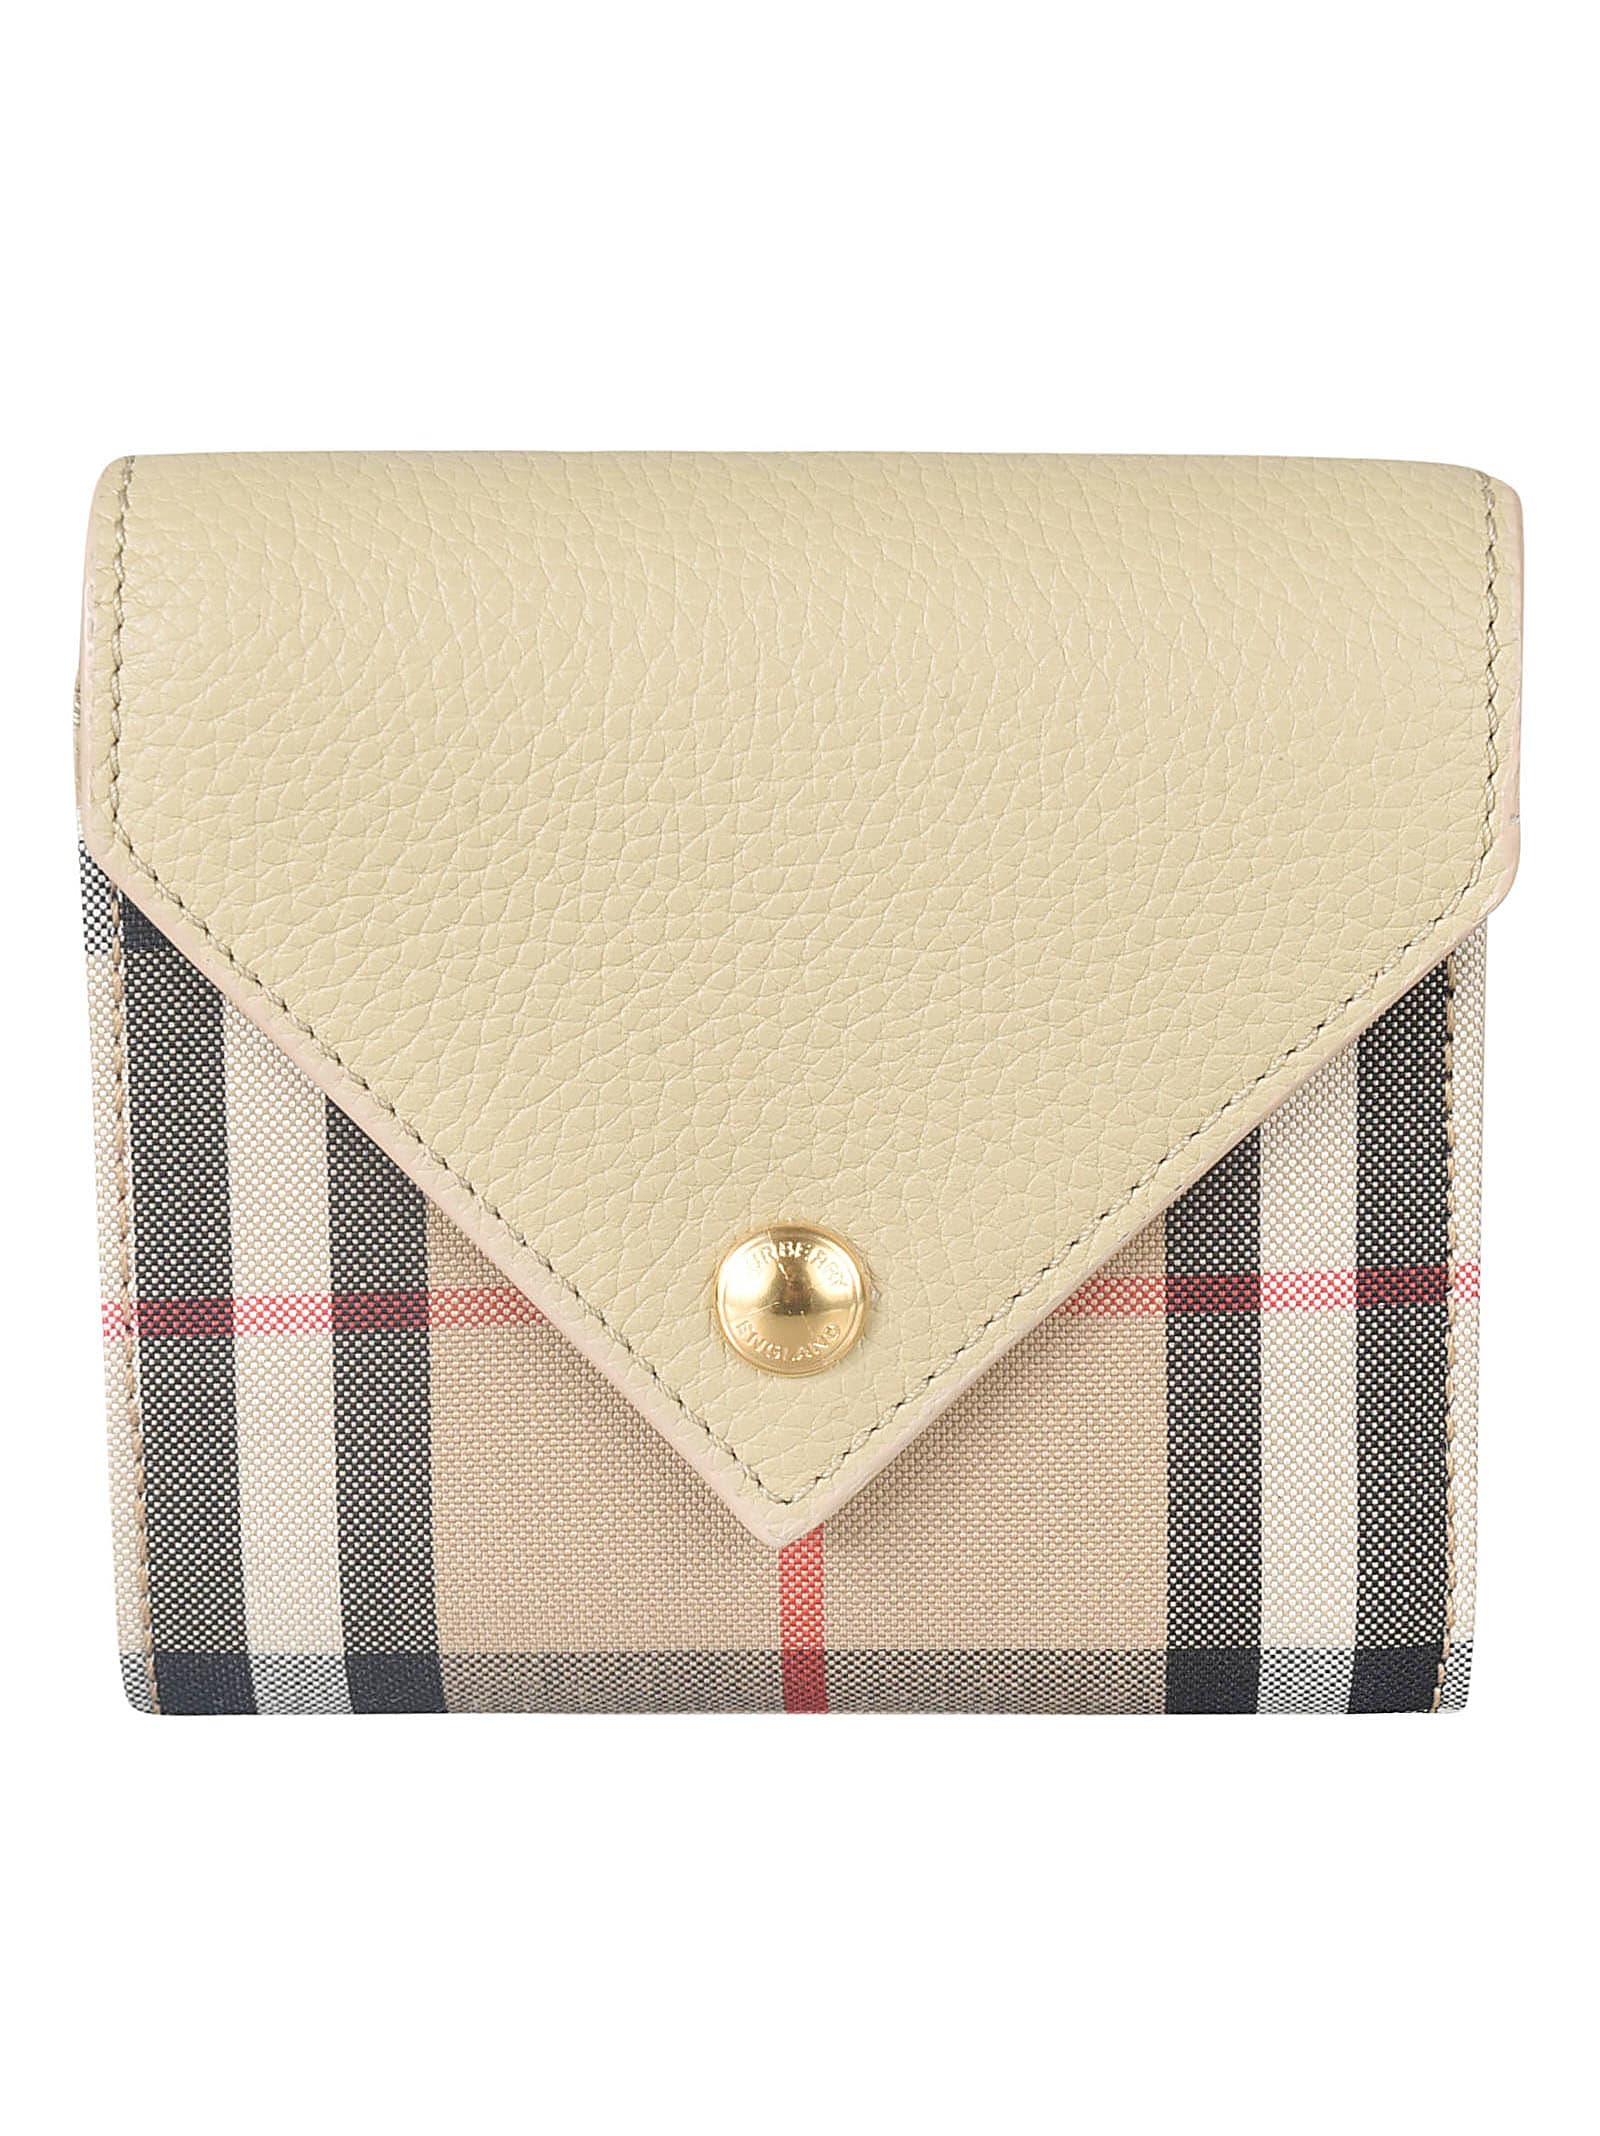 Burberry House Check Snap Button Wallet In Light Beige